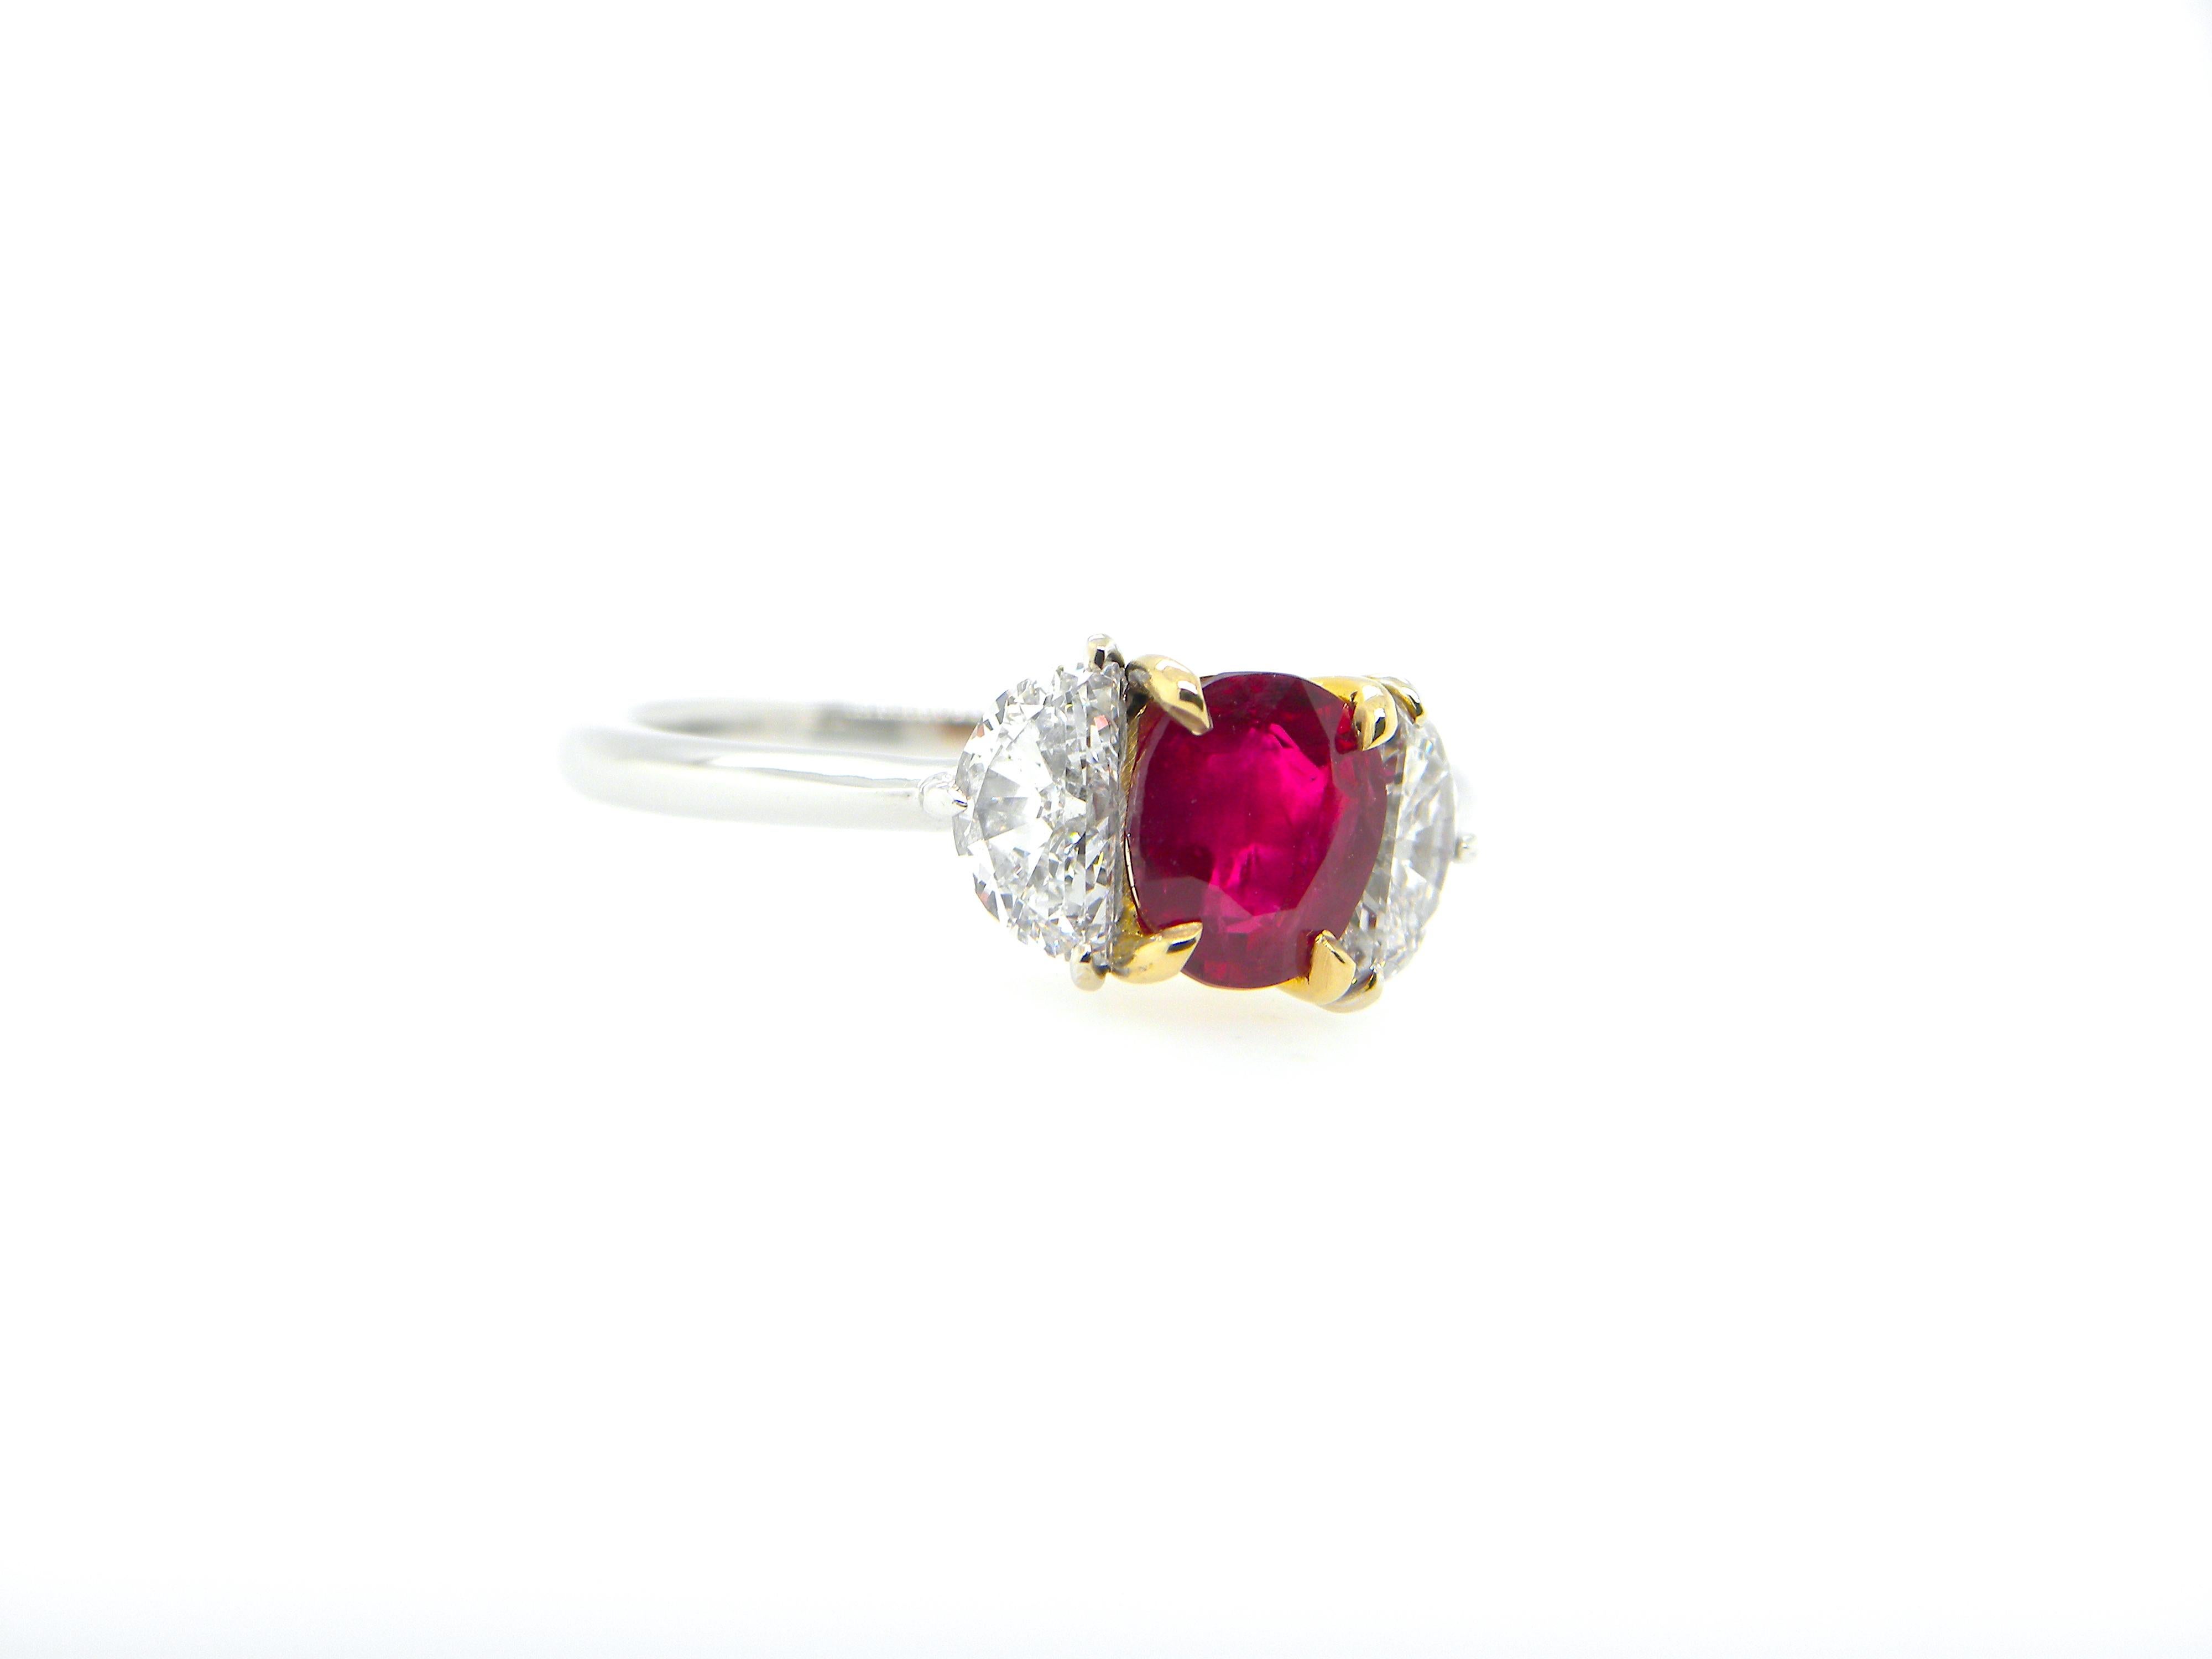 1.08 Carat GIA Certified Burma No Heat Pigeon's Blood Red Ruby and Diamond Ring:

A stunning three-stone ring, it features a rare GIA certified unheated Burmese pigeon's blood red ruby weighing 1.08 carat flanked by super-white half-moon cut